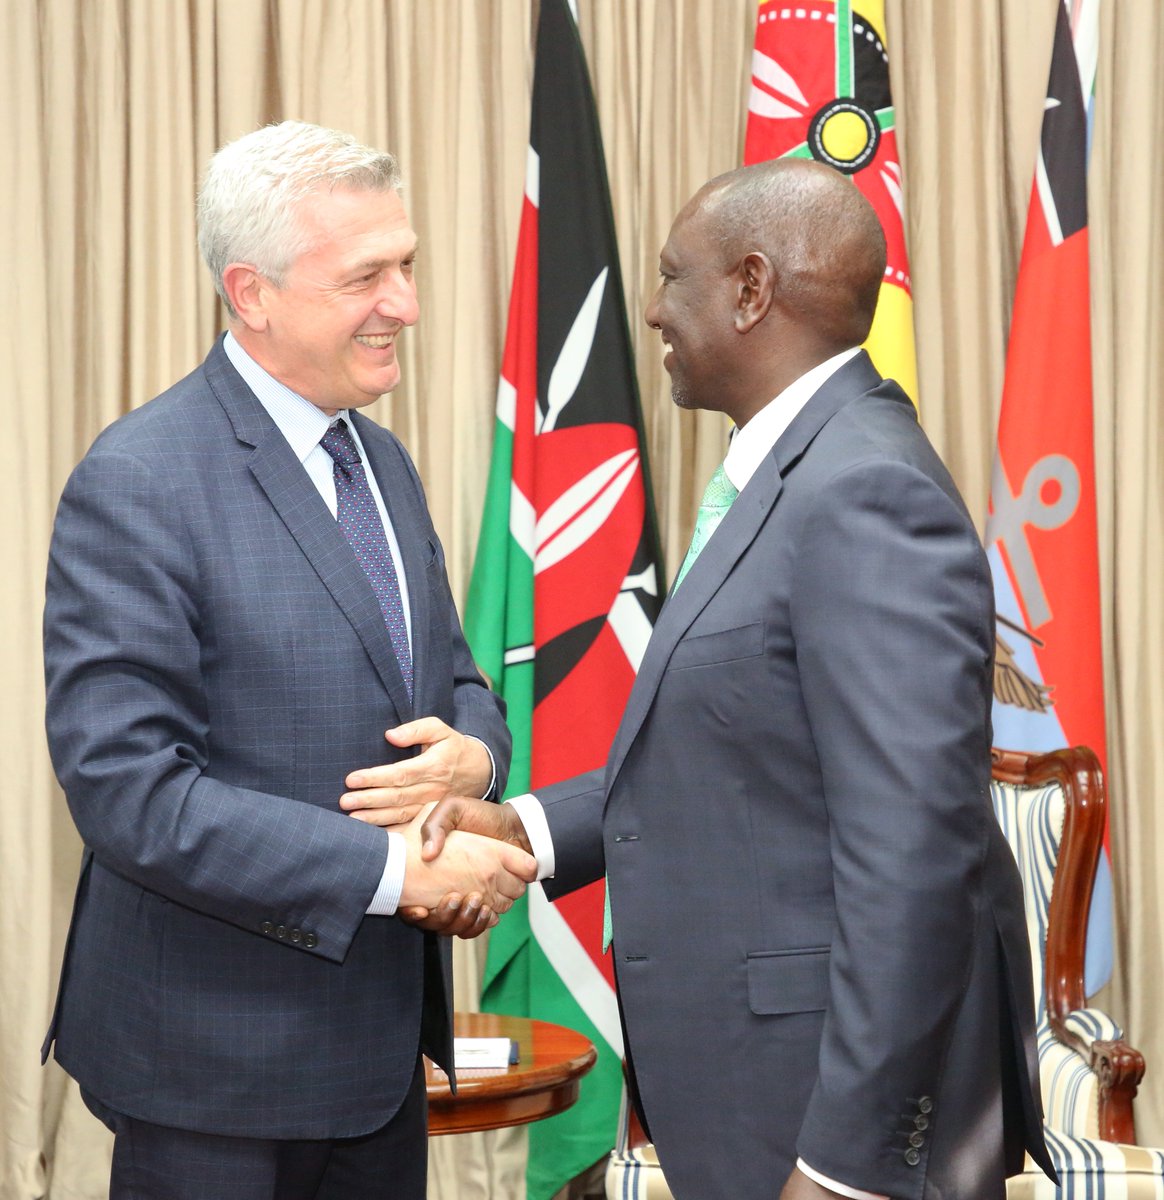 1/3 President @WilliamsRuto has welcomed the move by the United Nations High Commissioner for Refugees to integrate refugees into host communities.